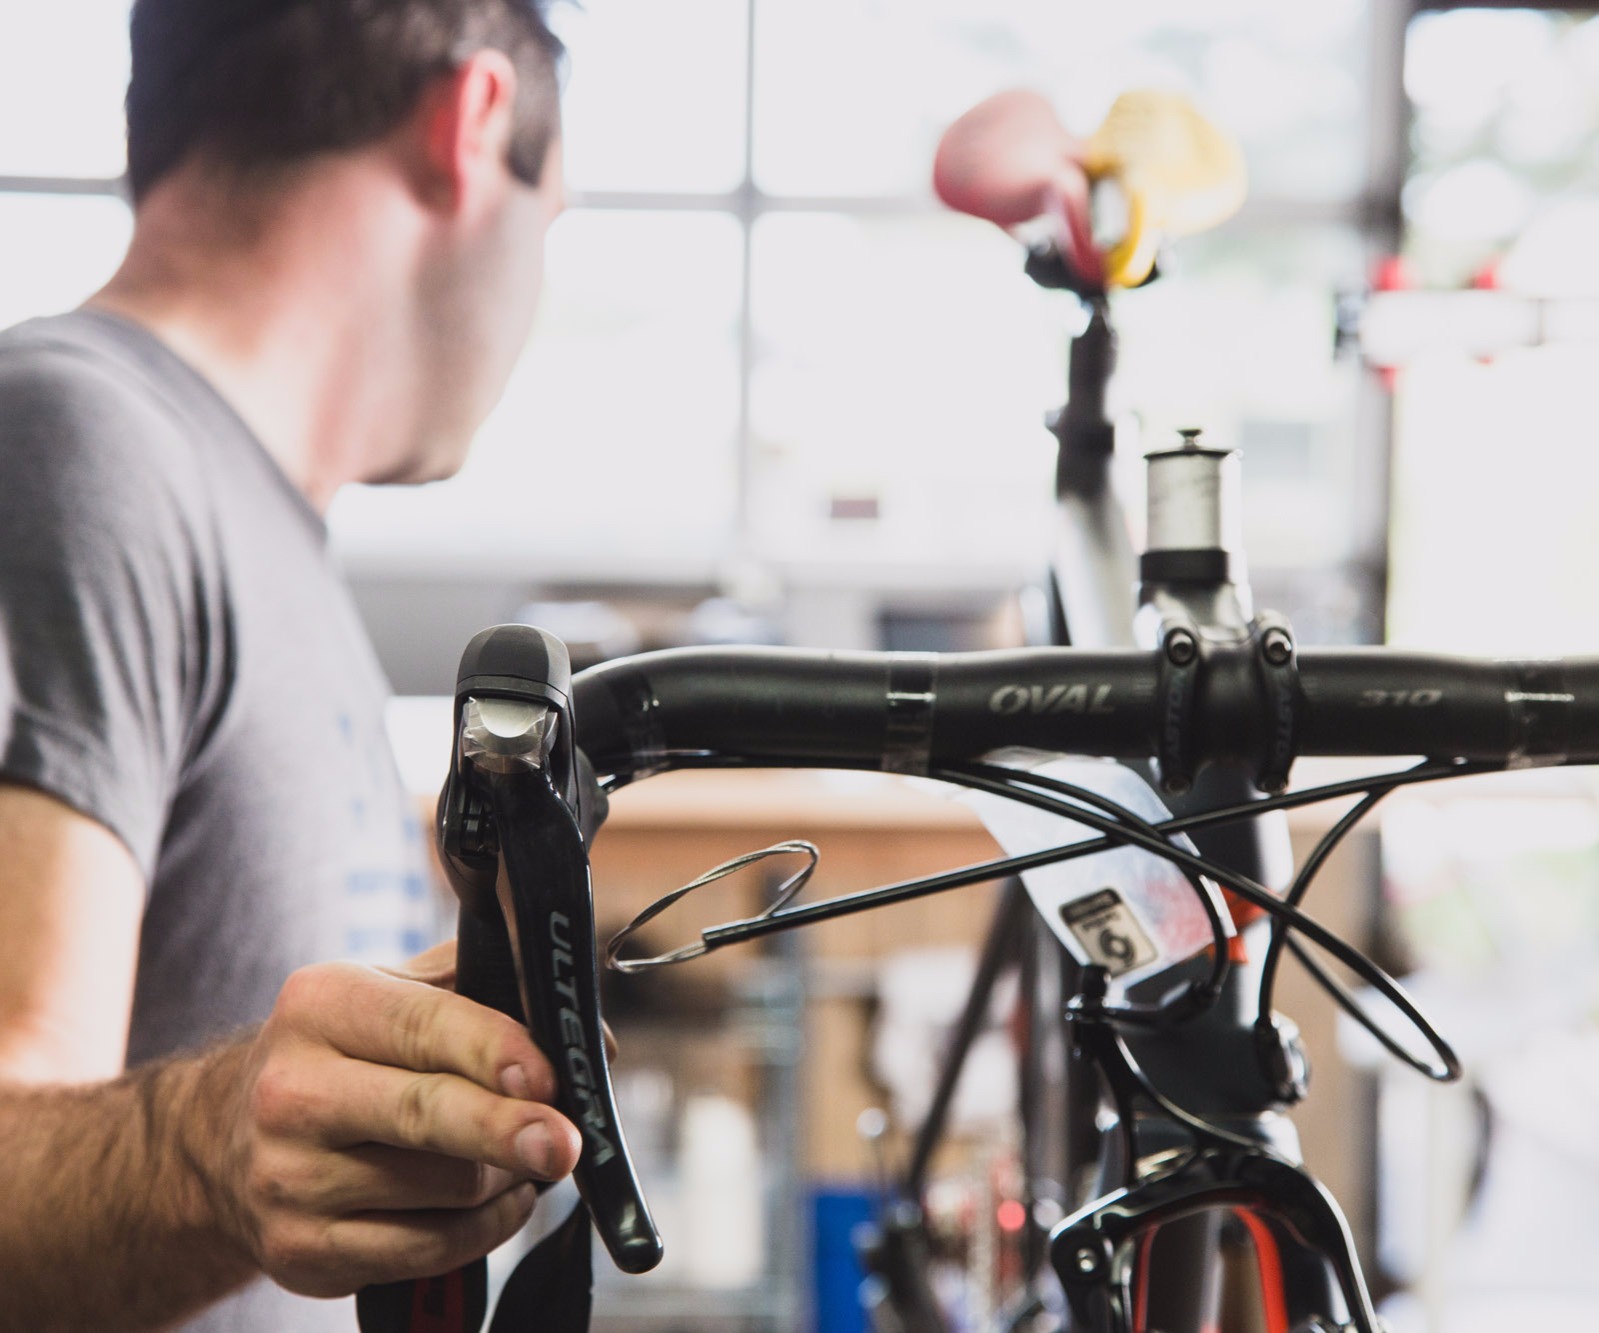 A bicycle mechanic adjusting a shifter in a repair shop.